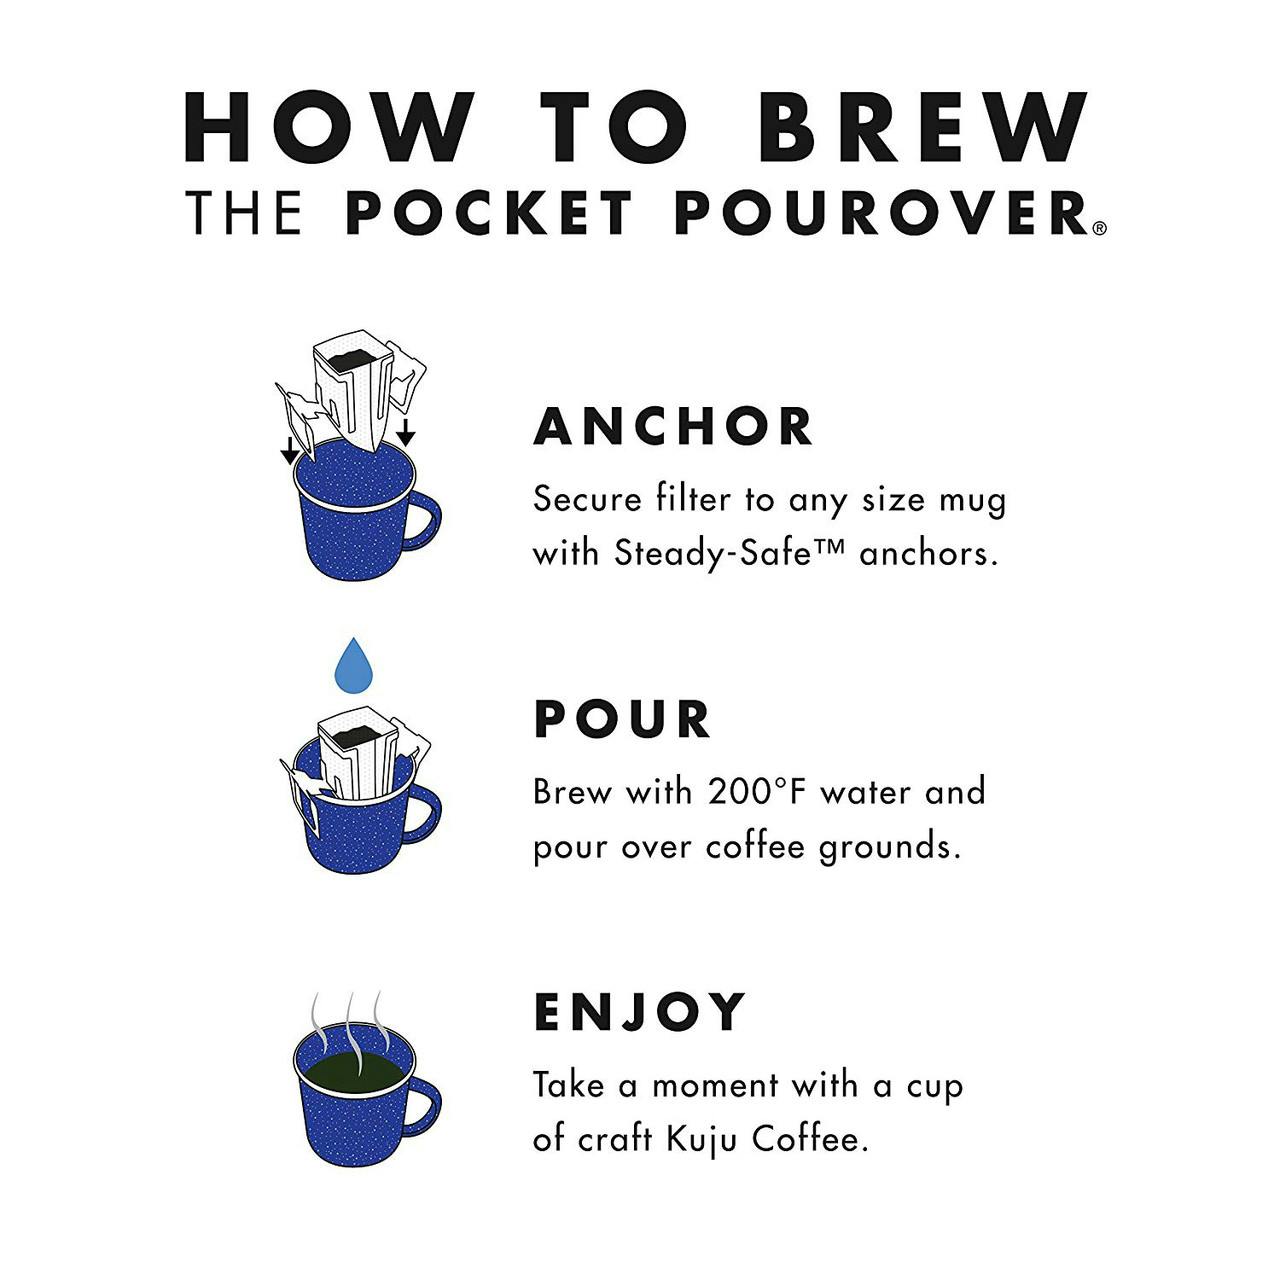 Pocket Pour Over One-Cup Pouch Bold Awakening NO_COLOUR